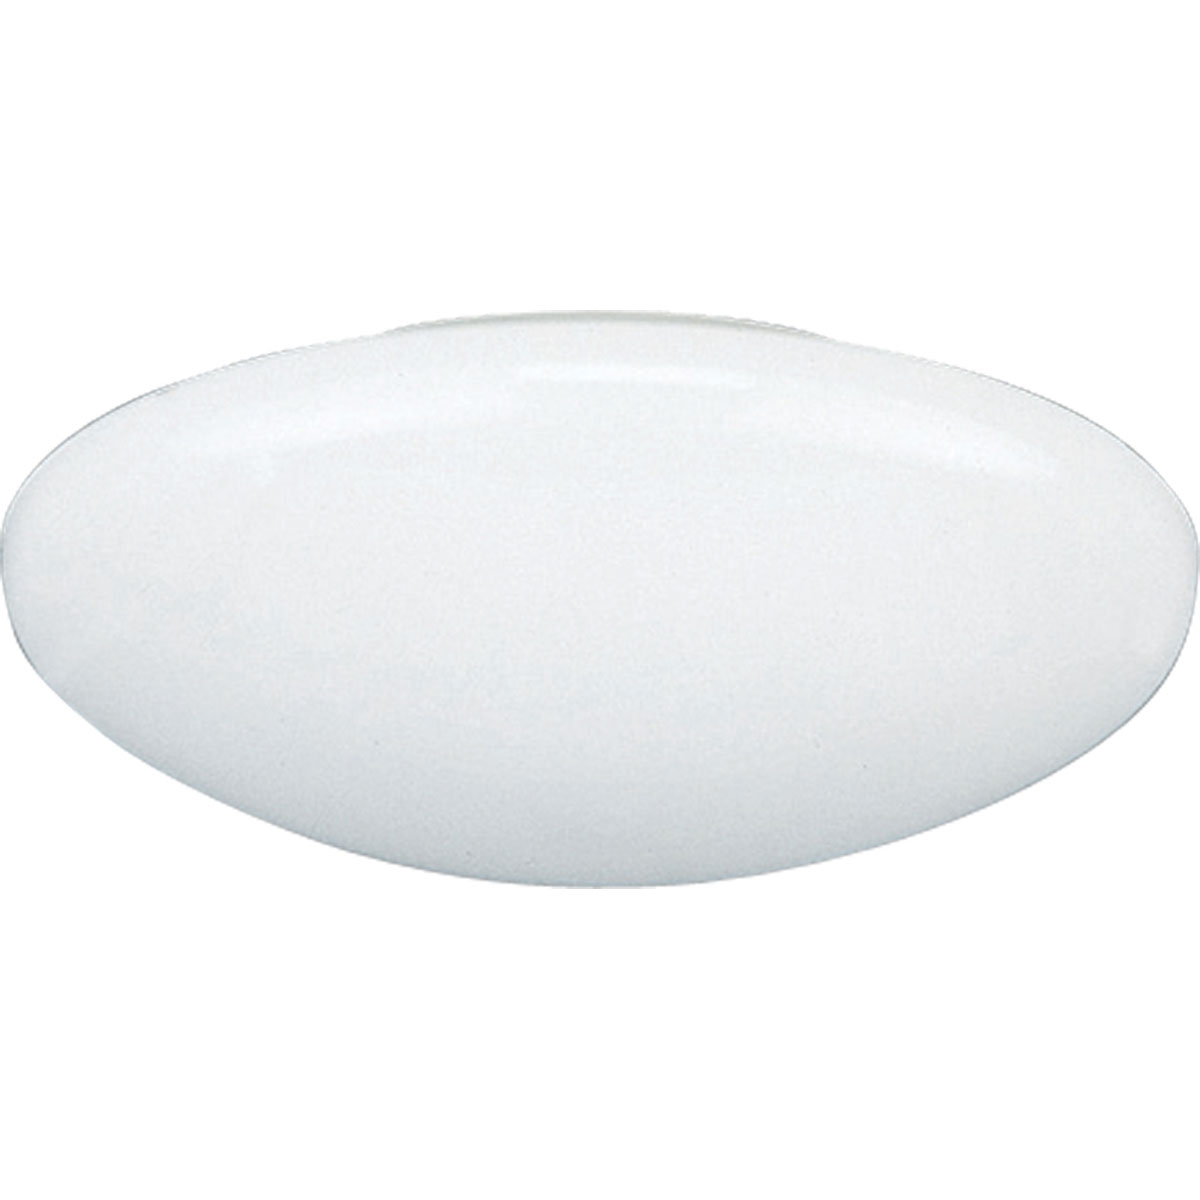 6 in Dome Shower Light in a White finish. For use in insulated ceilings. Wet location listed for shower use.